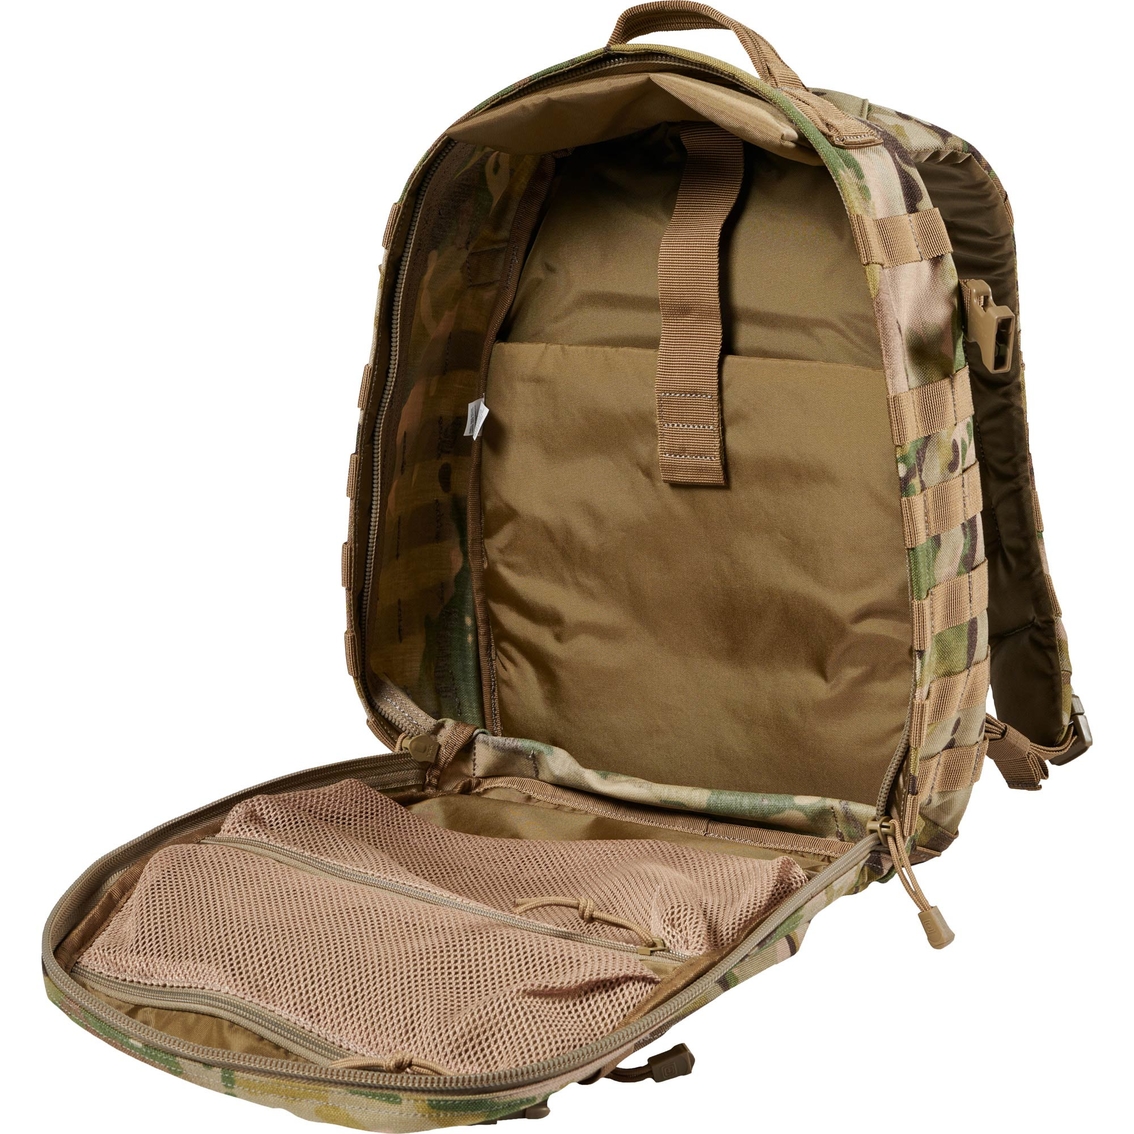 5.11 RUSH 12 2.0 Backpack - Image 7 of 9